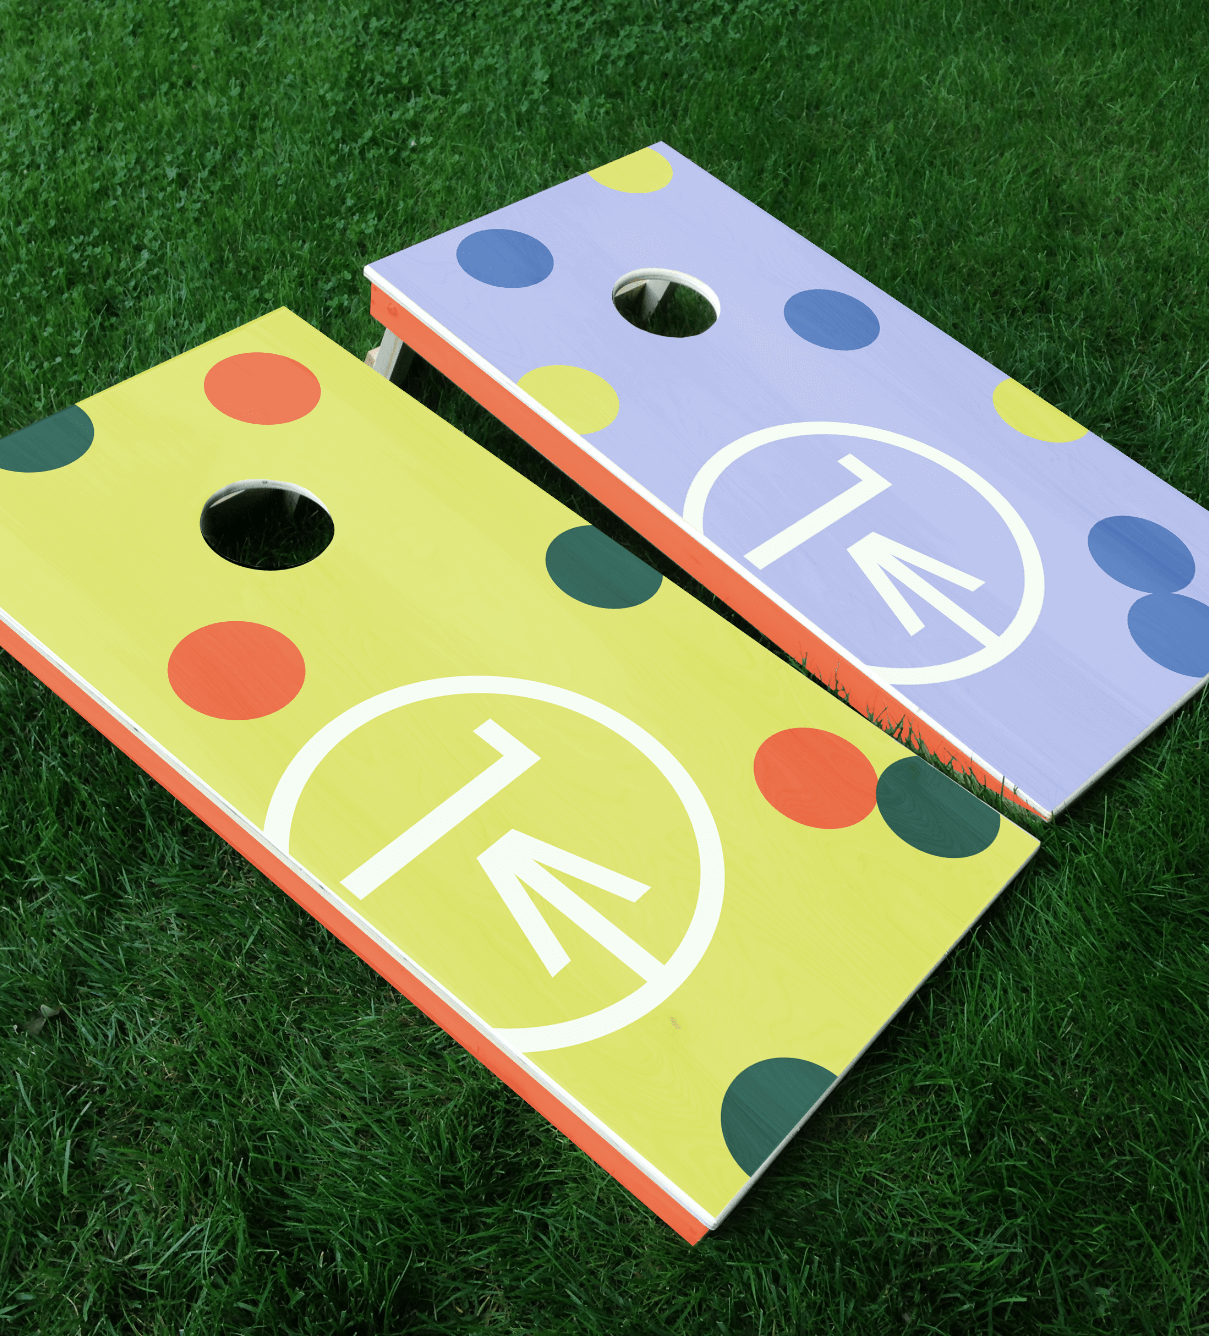 One West branded cornhole boards utilizing brand assets established by ST8MNT in identity project